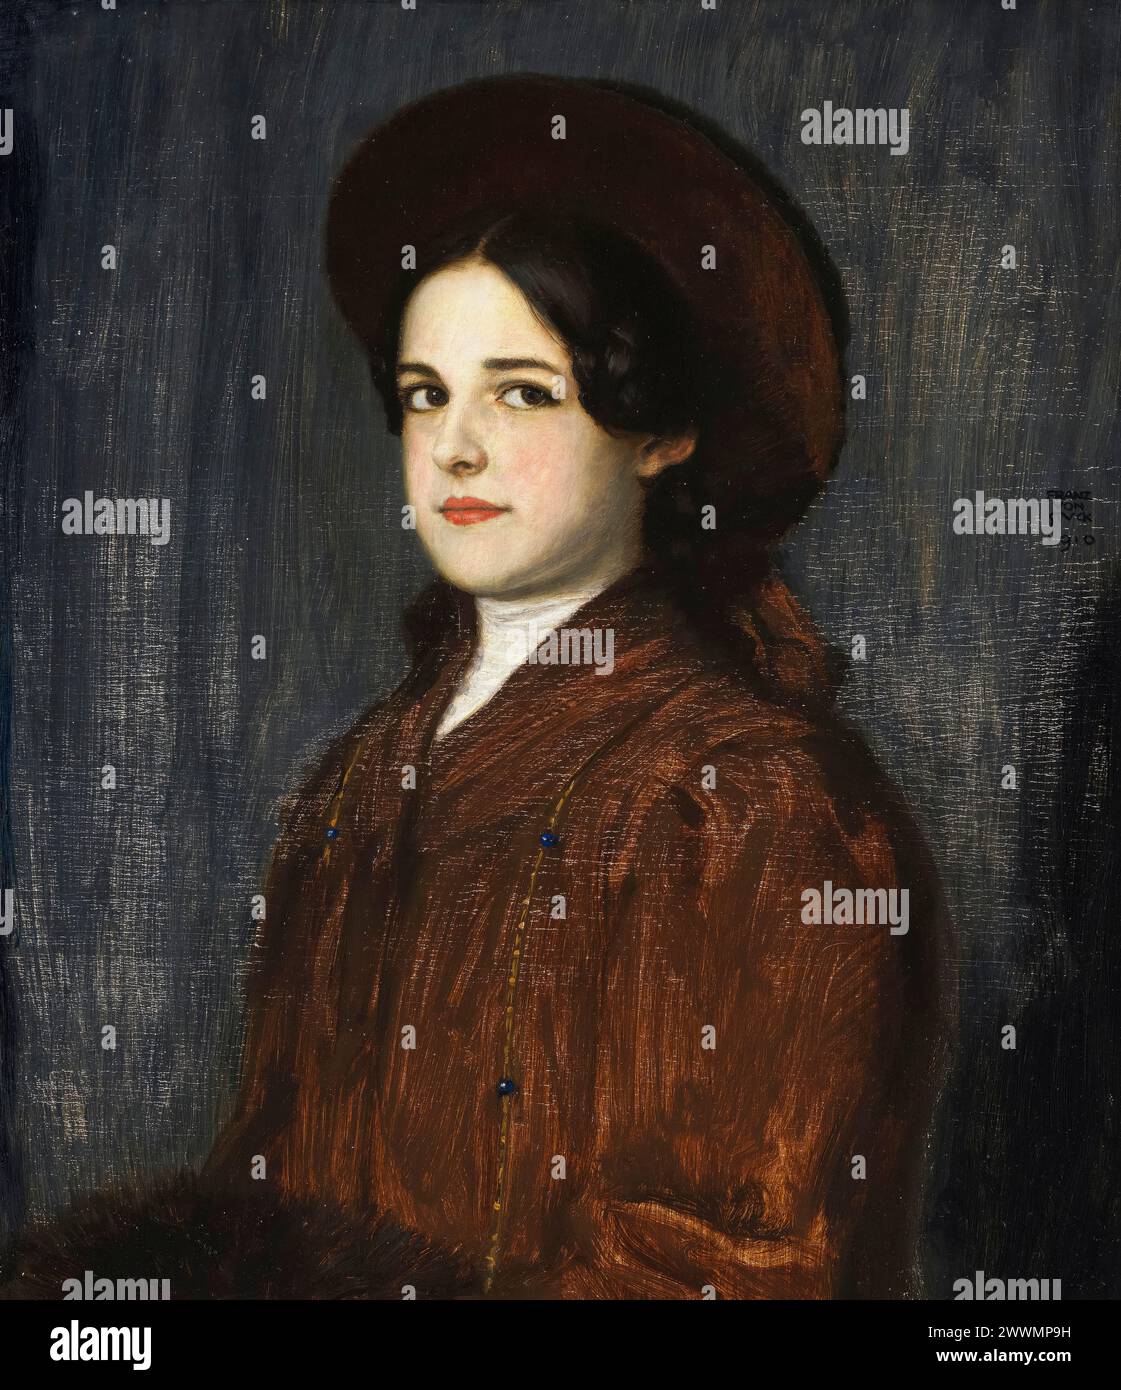 Franz von Stuck, Mary Stuck (Mary Lindpainter, 1865-1929), the artist’s wife, portrait painting in oil on panel, 1910 Stock Photo